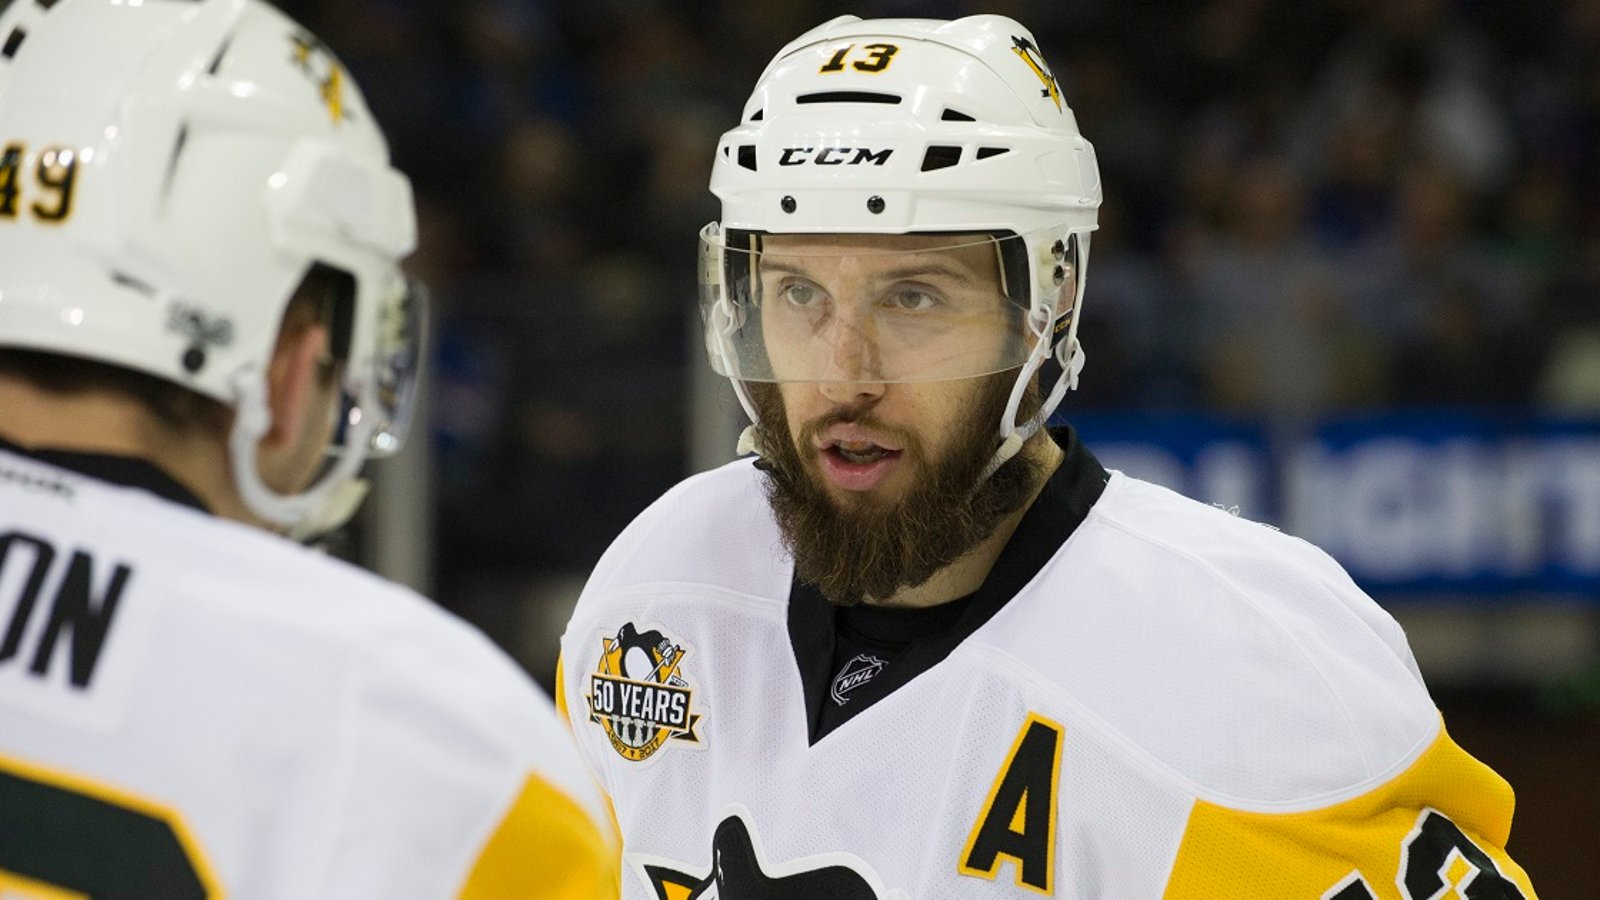 Stanley Cup Champion Nick Bonino expected to visit rival team tomorrow.